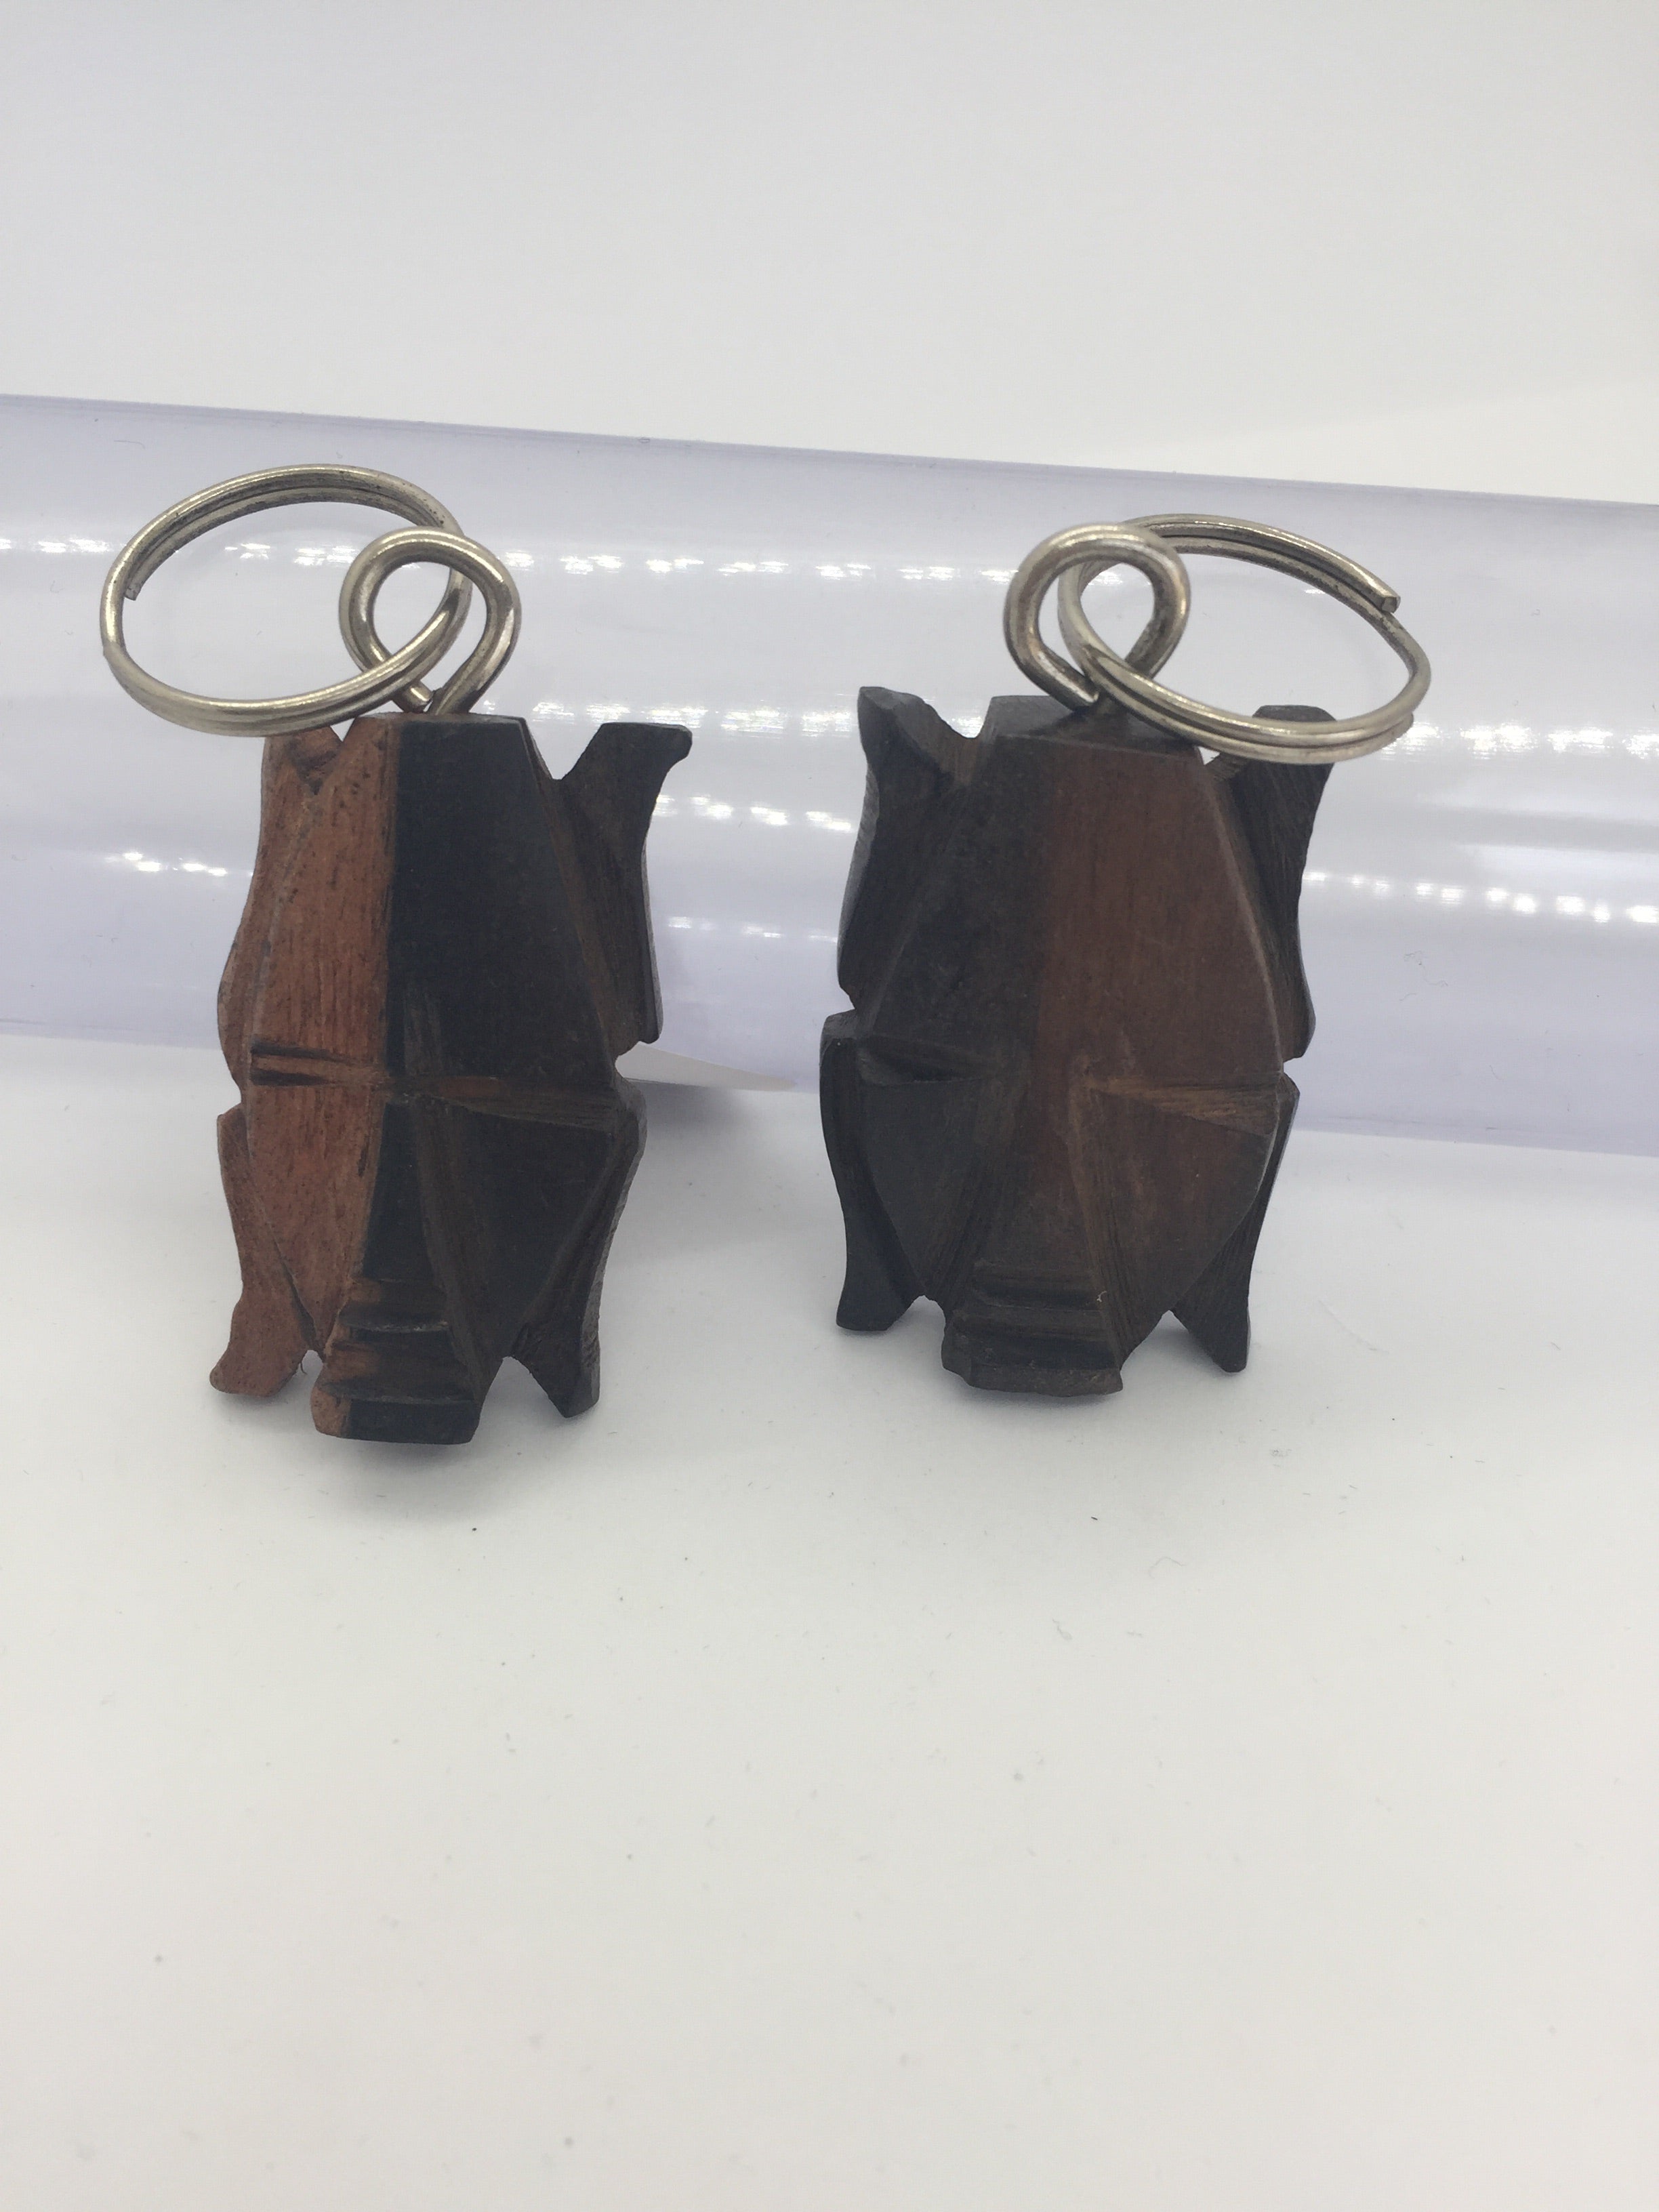 Wooded face keychain